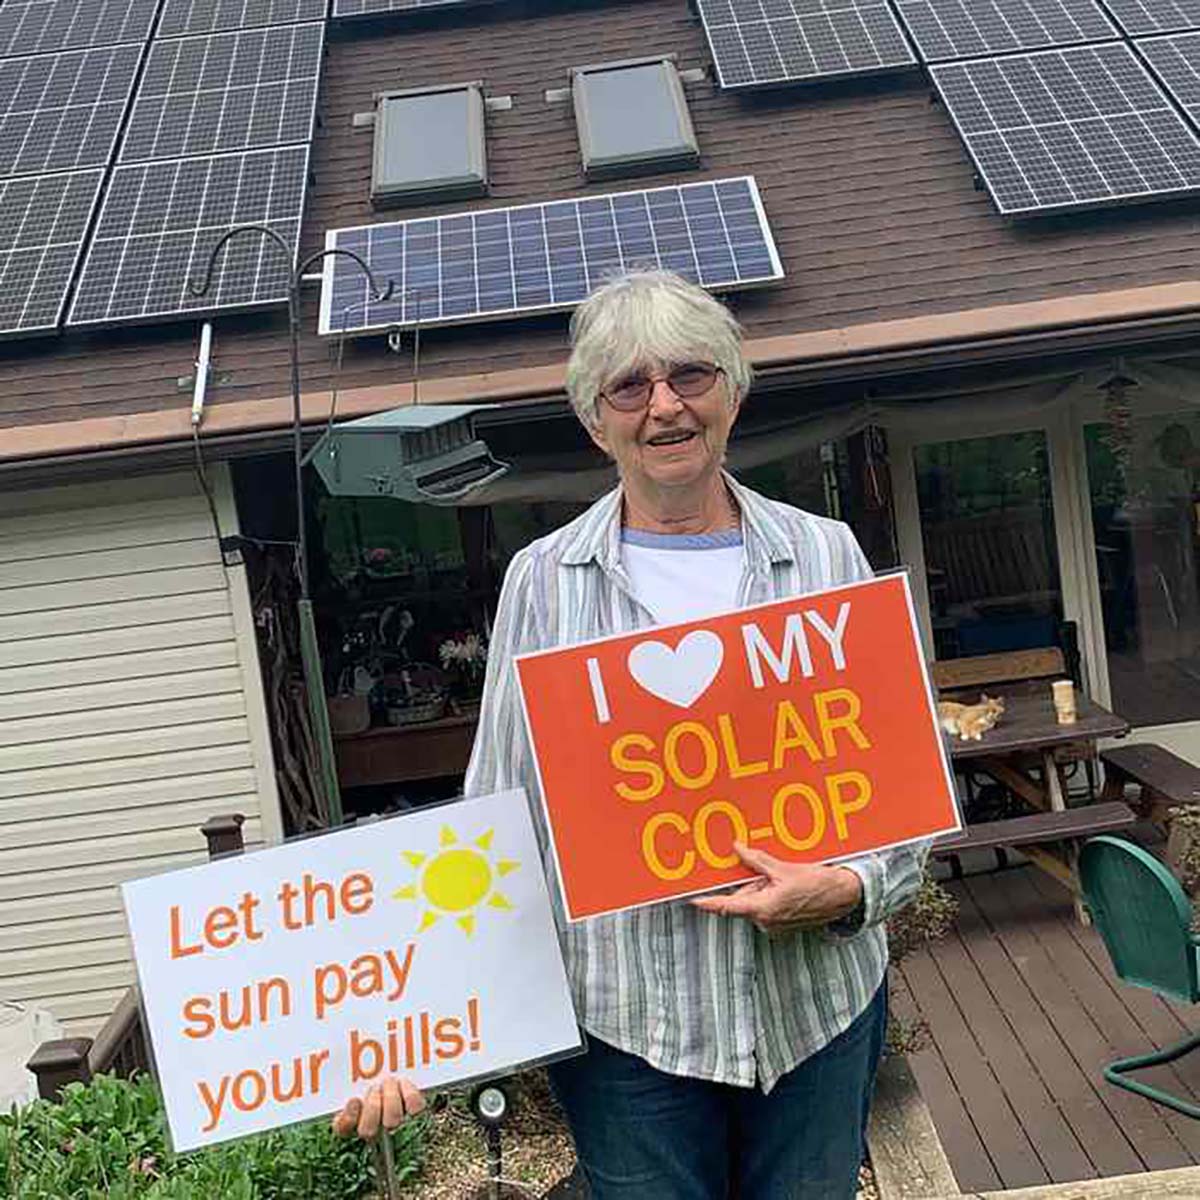 Woman holding sign that says "I love my solar co-op."